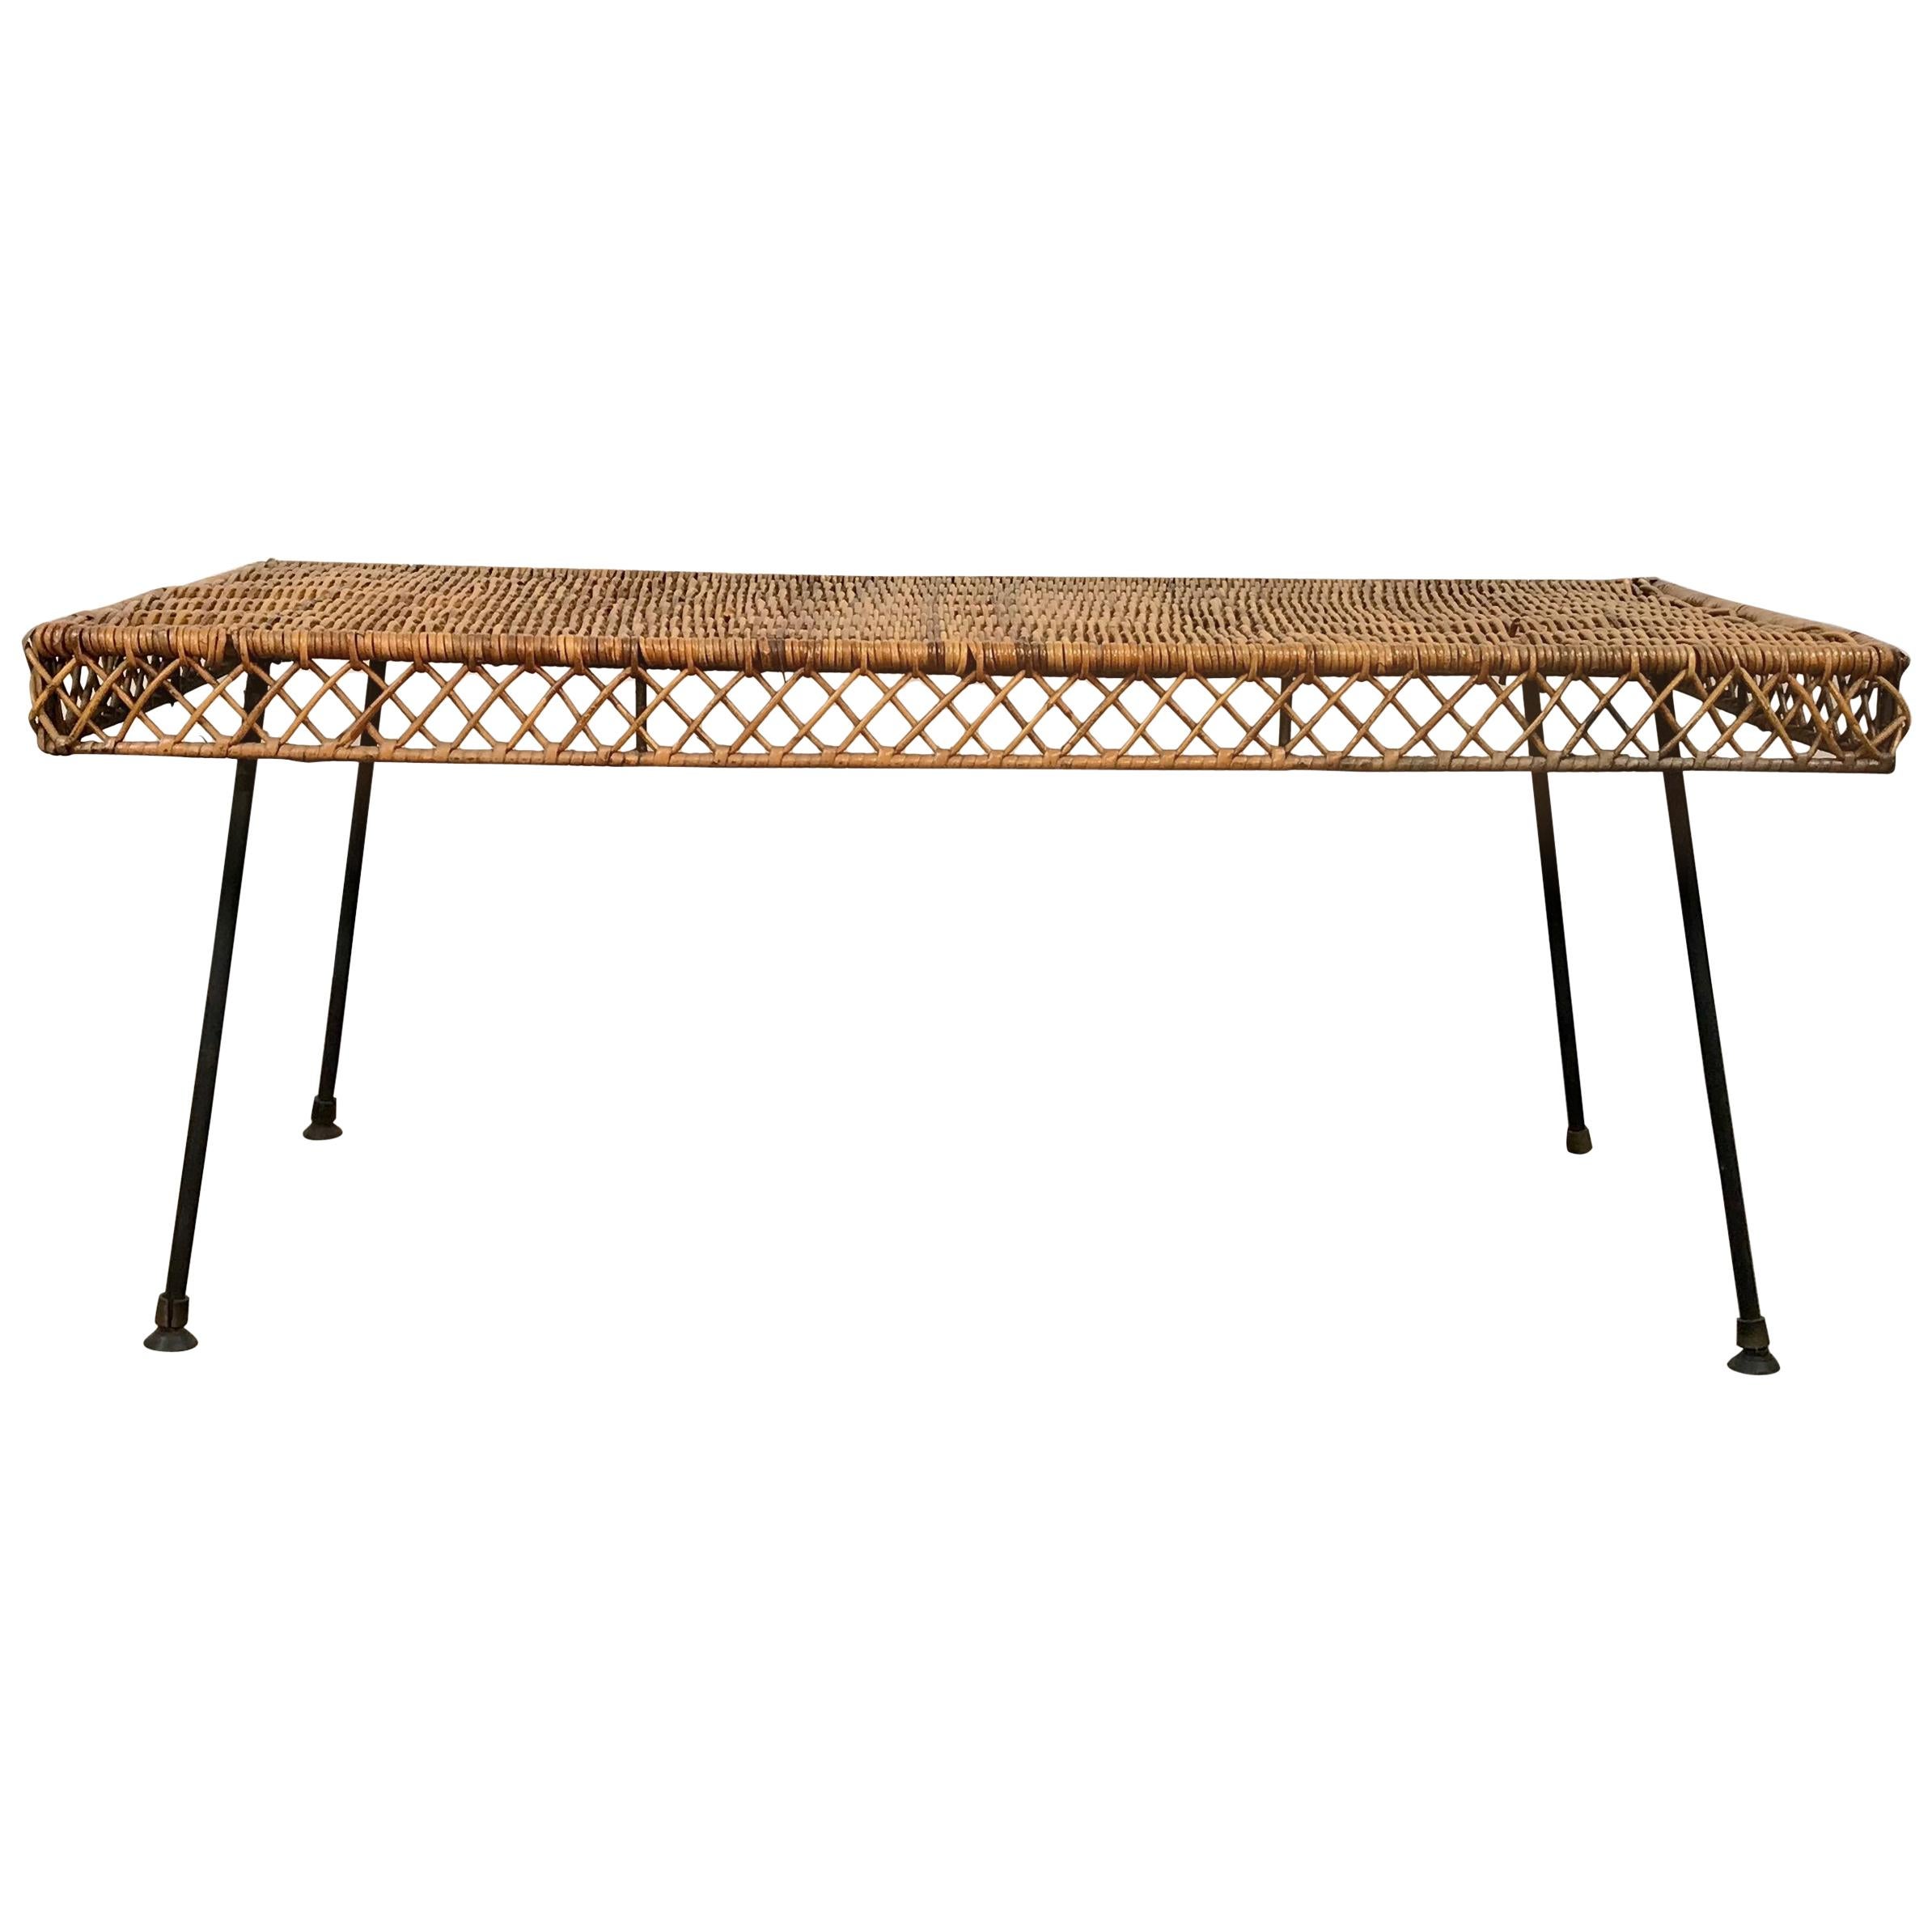 Classic Mid-Century Modern Wicker and Iron Cocktail Table by Danny Ho Fong